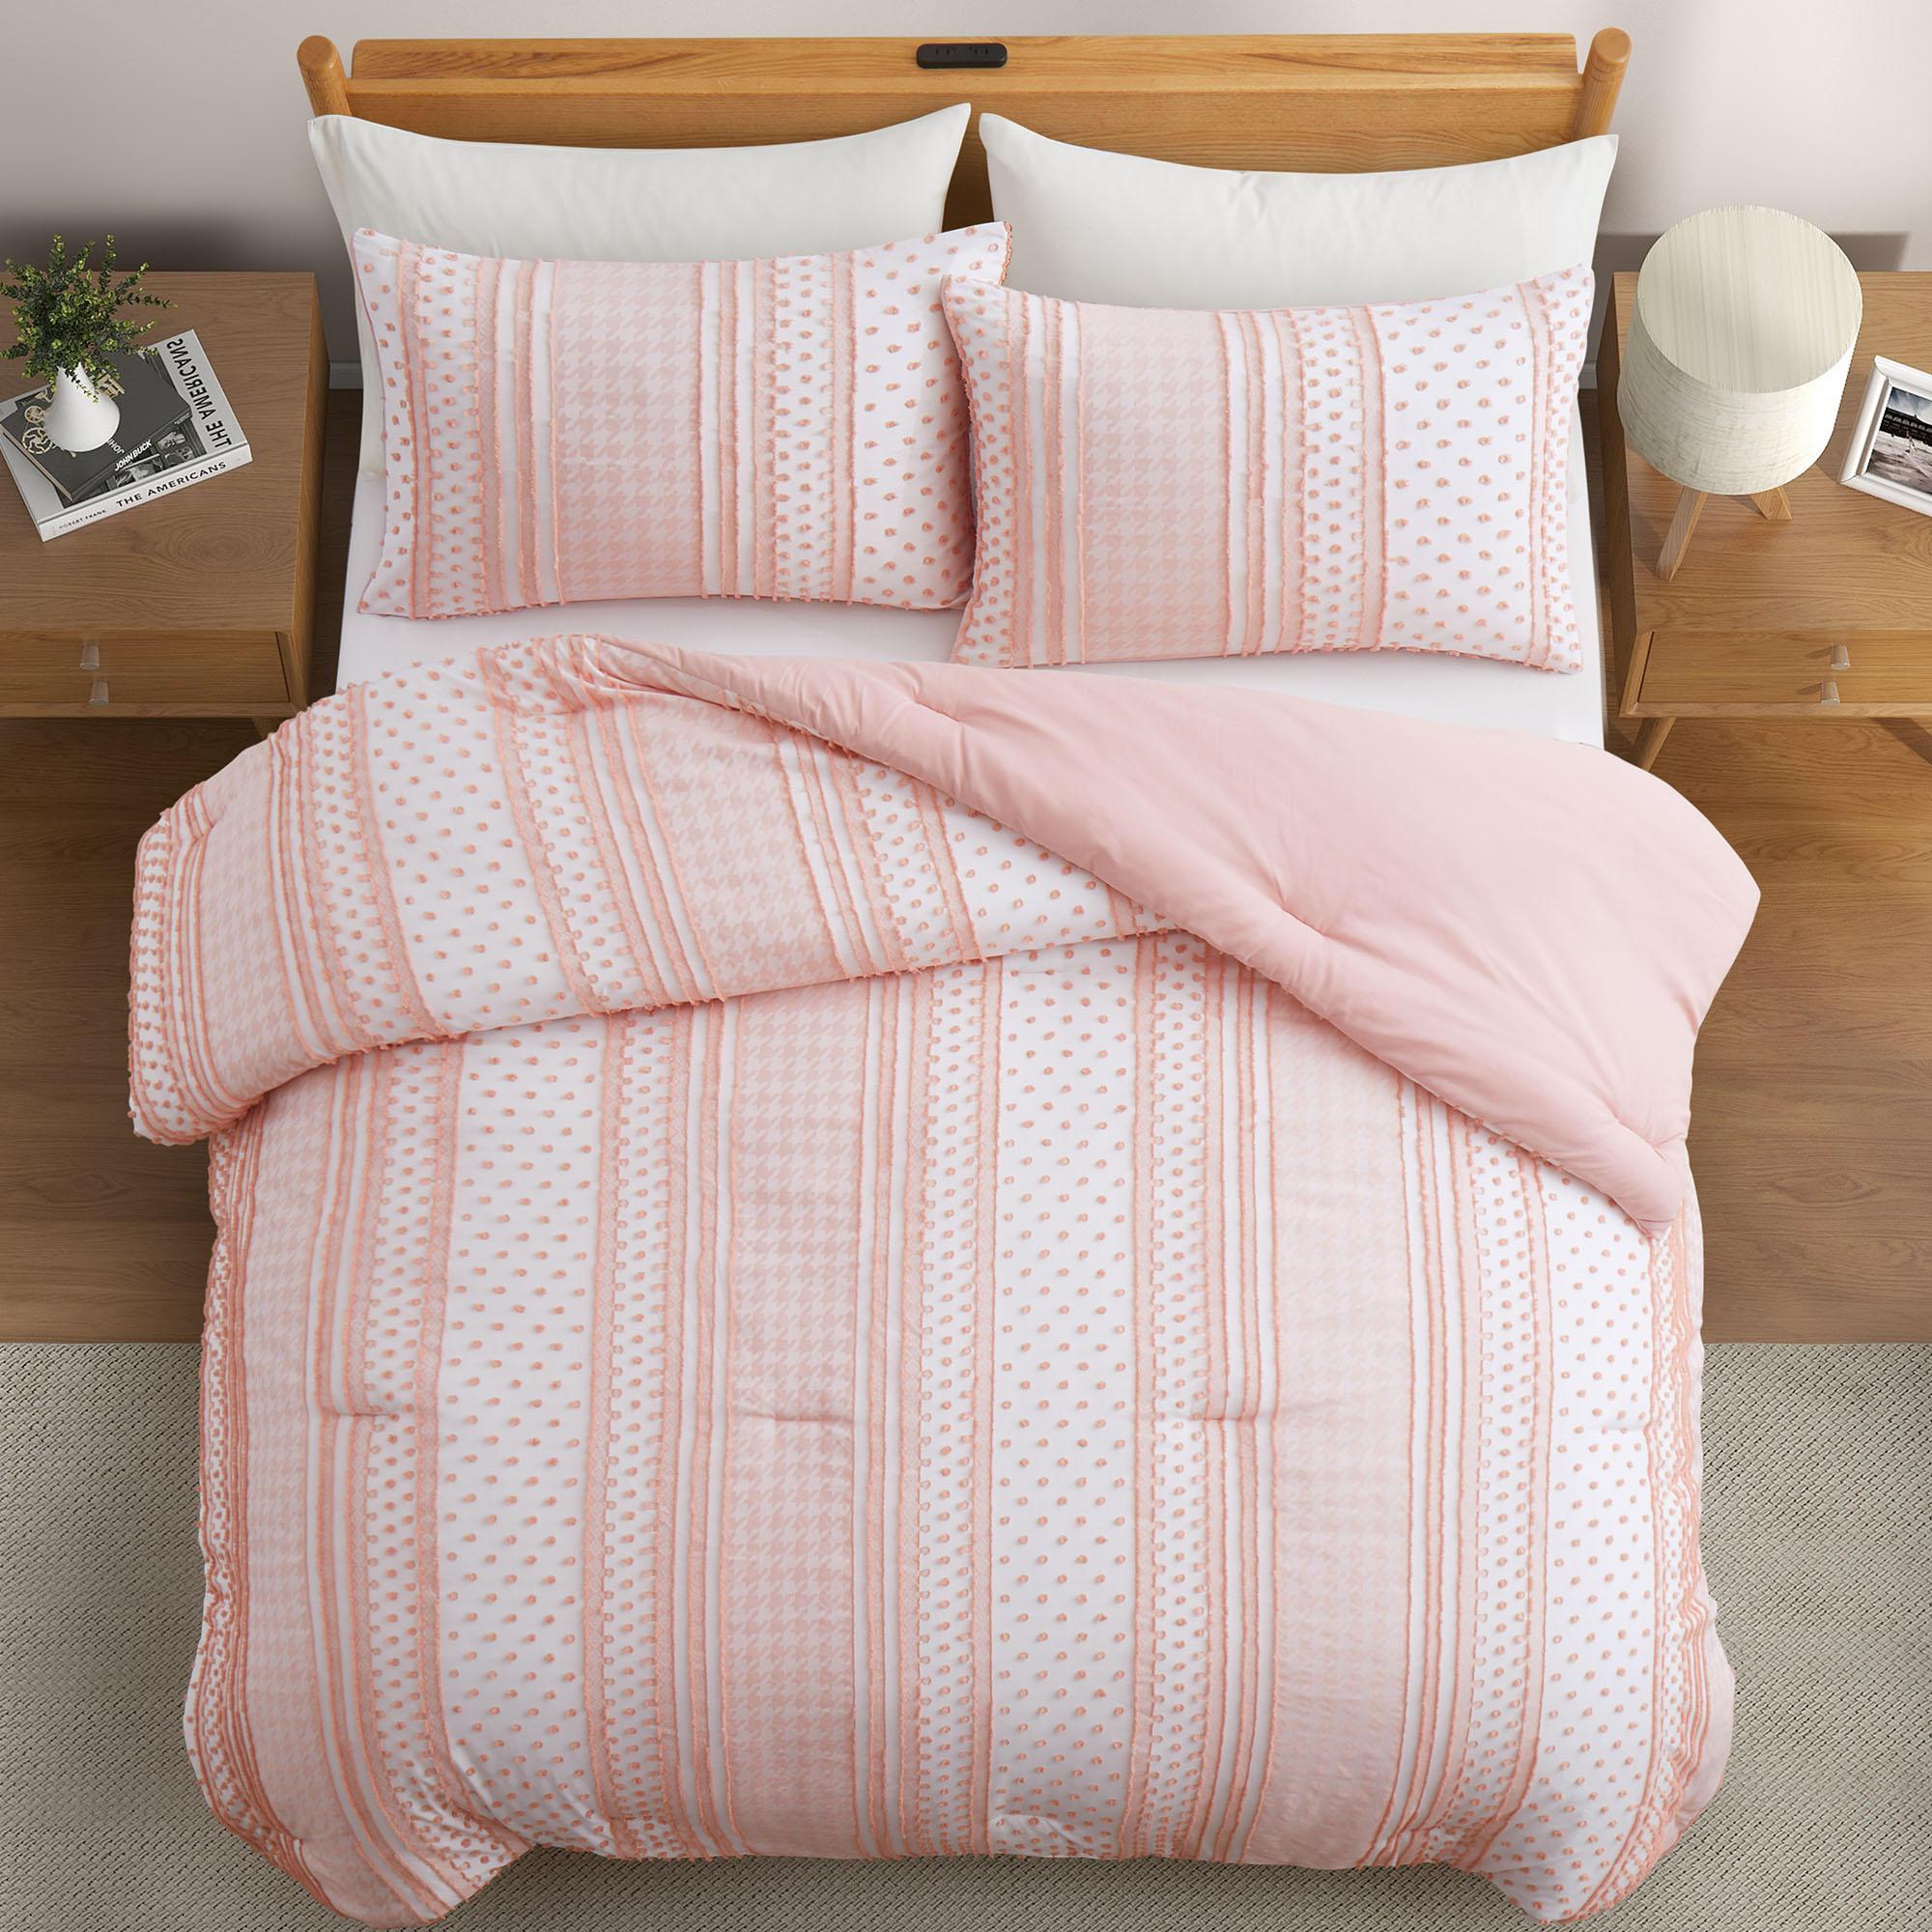 Peace Nest All Season Warmth Clipped Microfiber Comforter Set, Pink, King - image 1 of 6